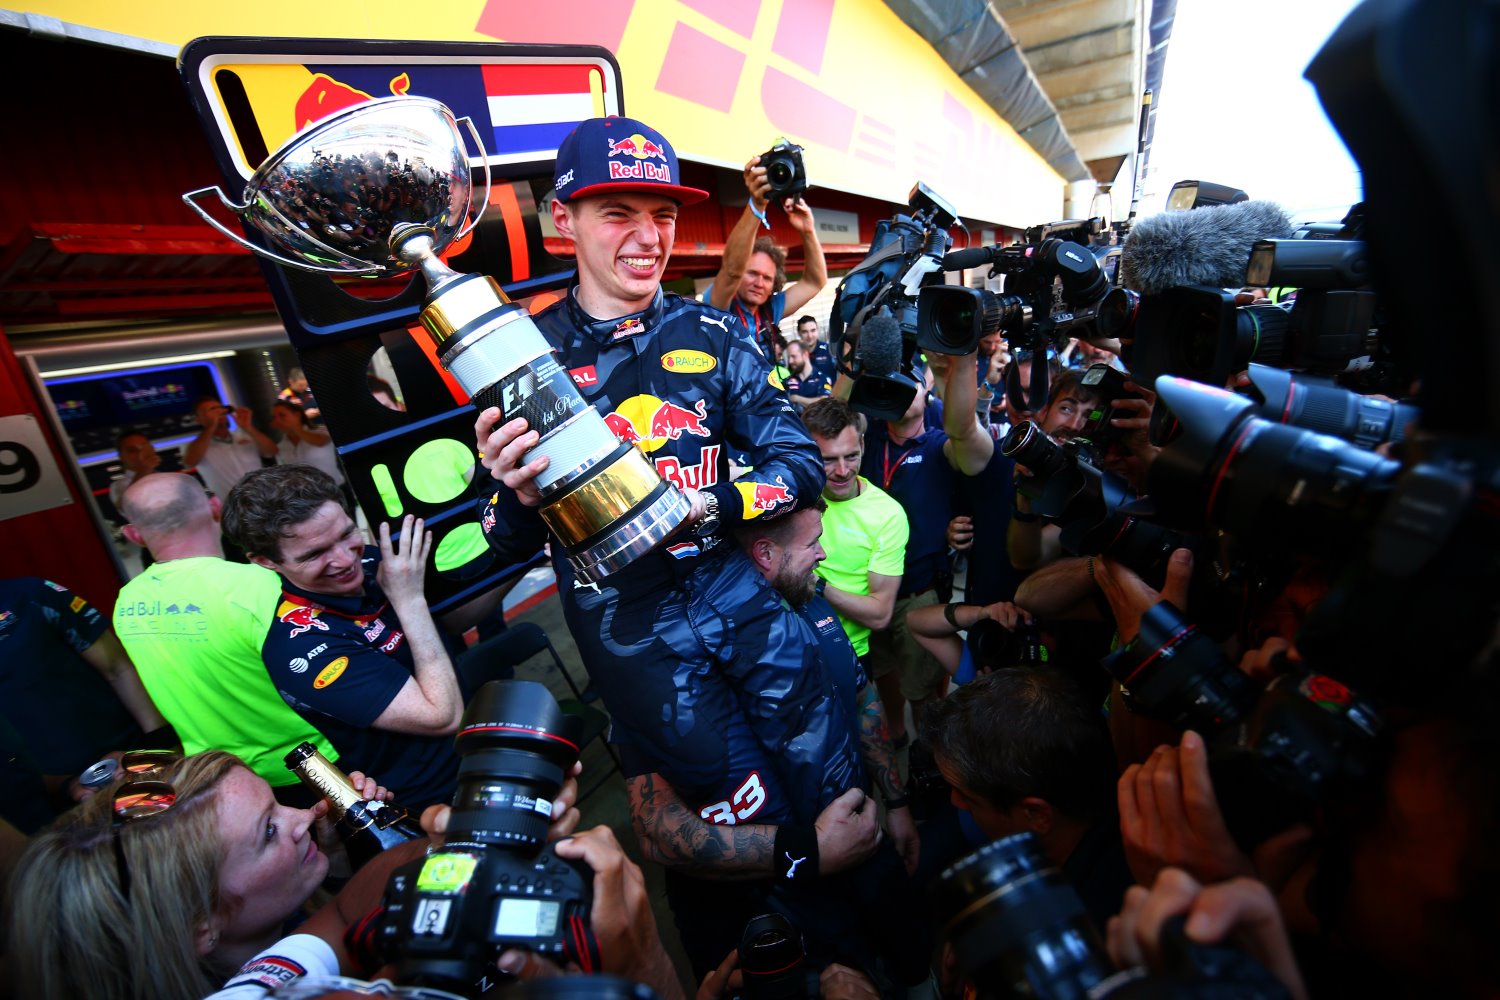 A happy Verstappen is surrounded by reporters